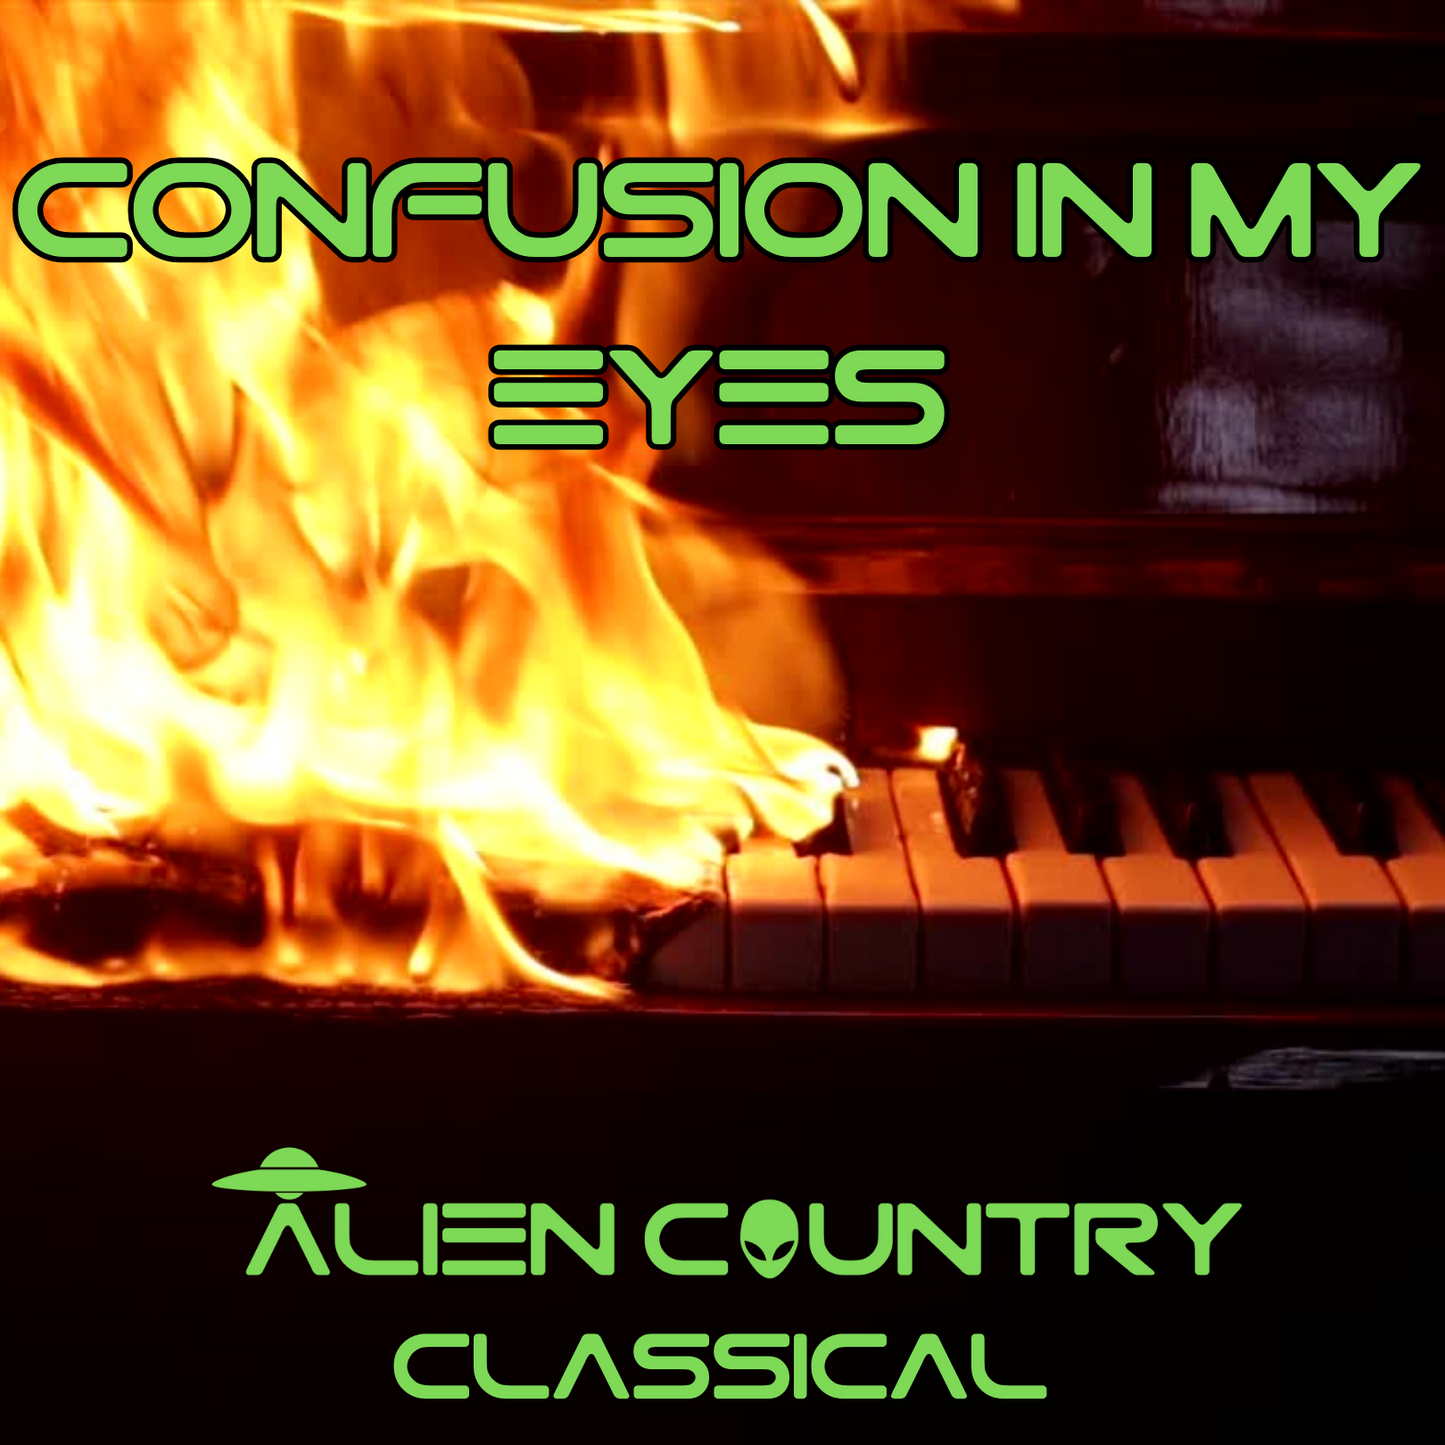 CONFUSION - CLASSICAL